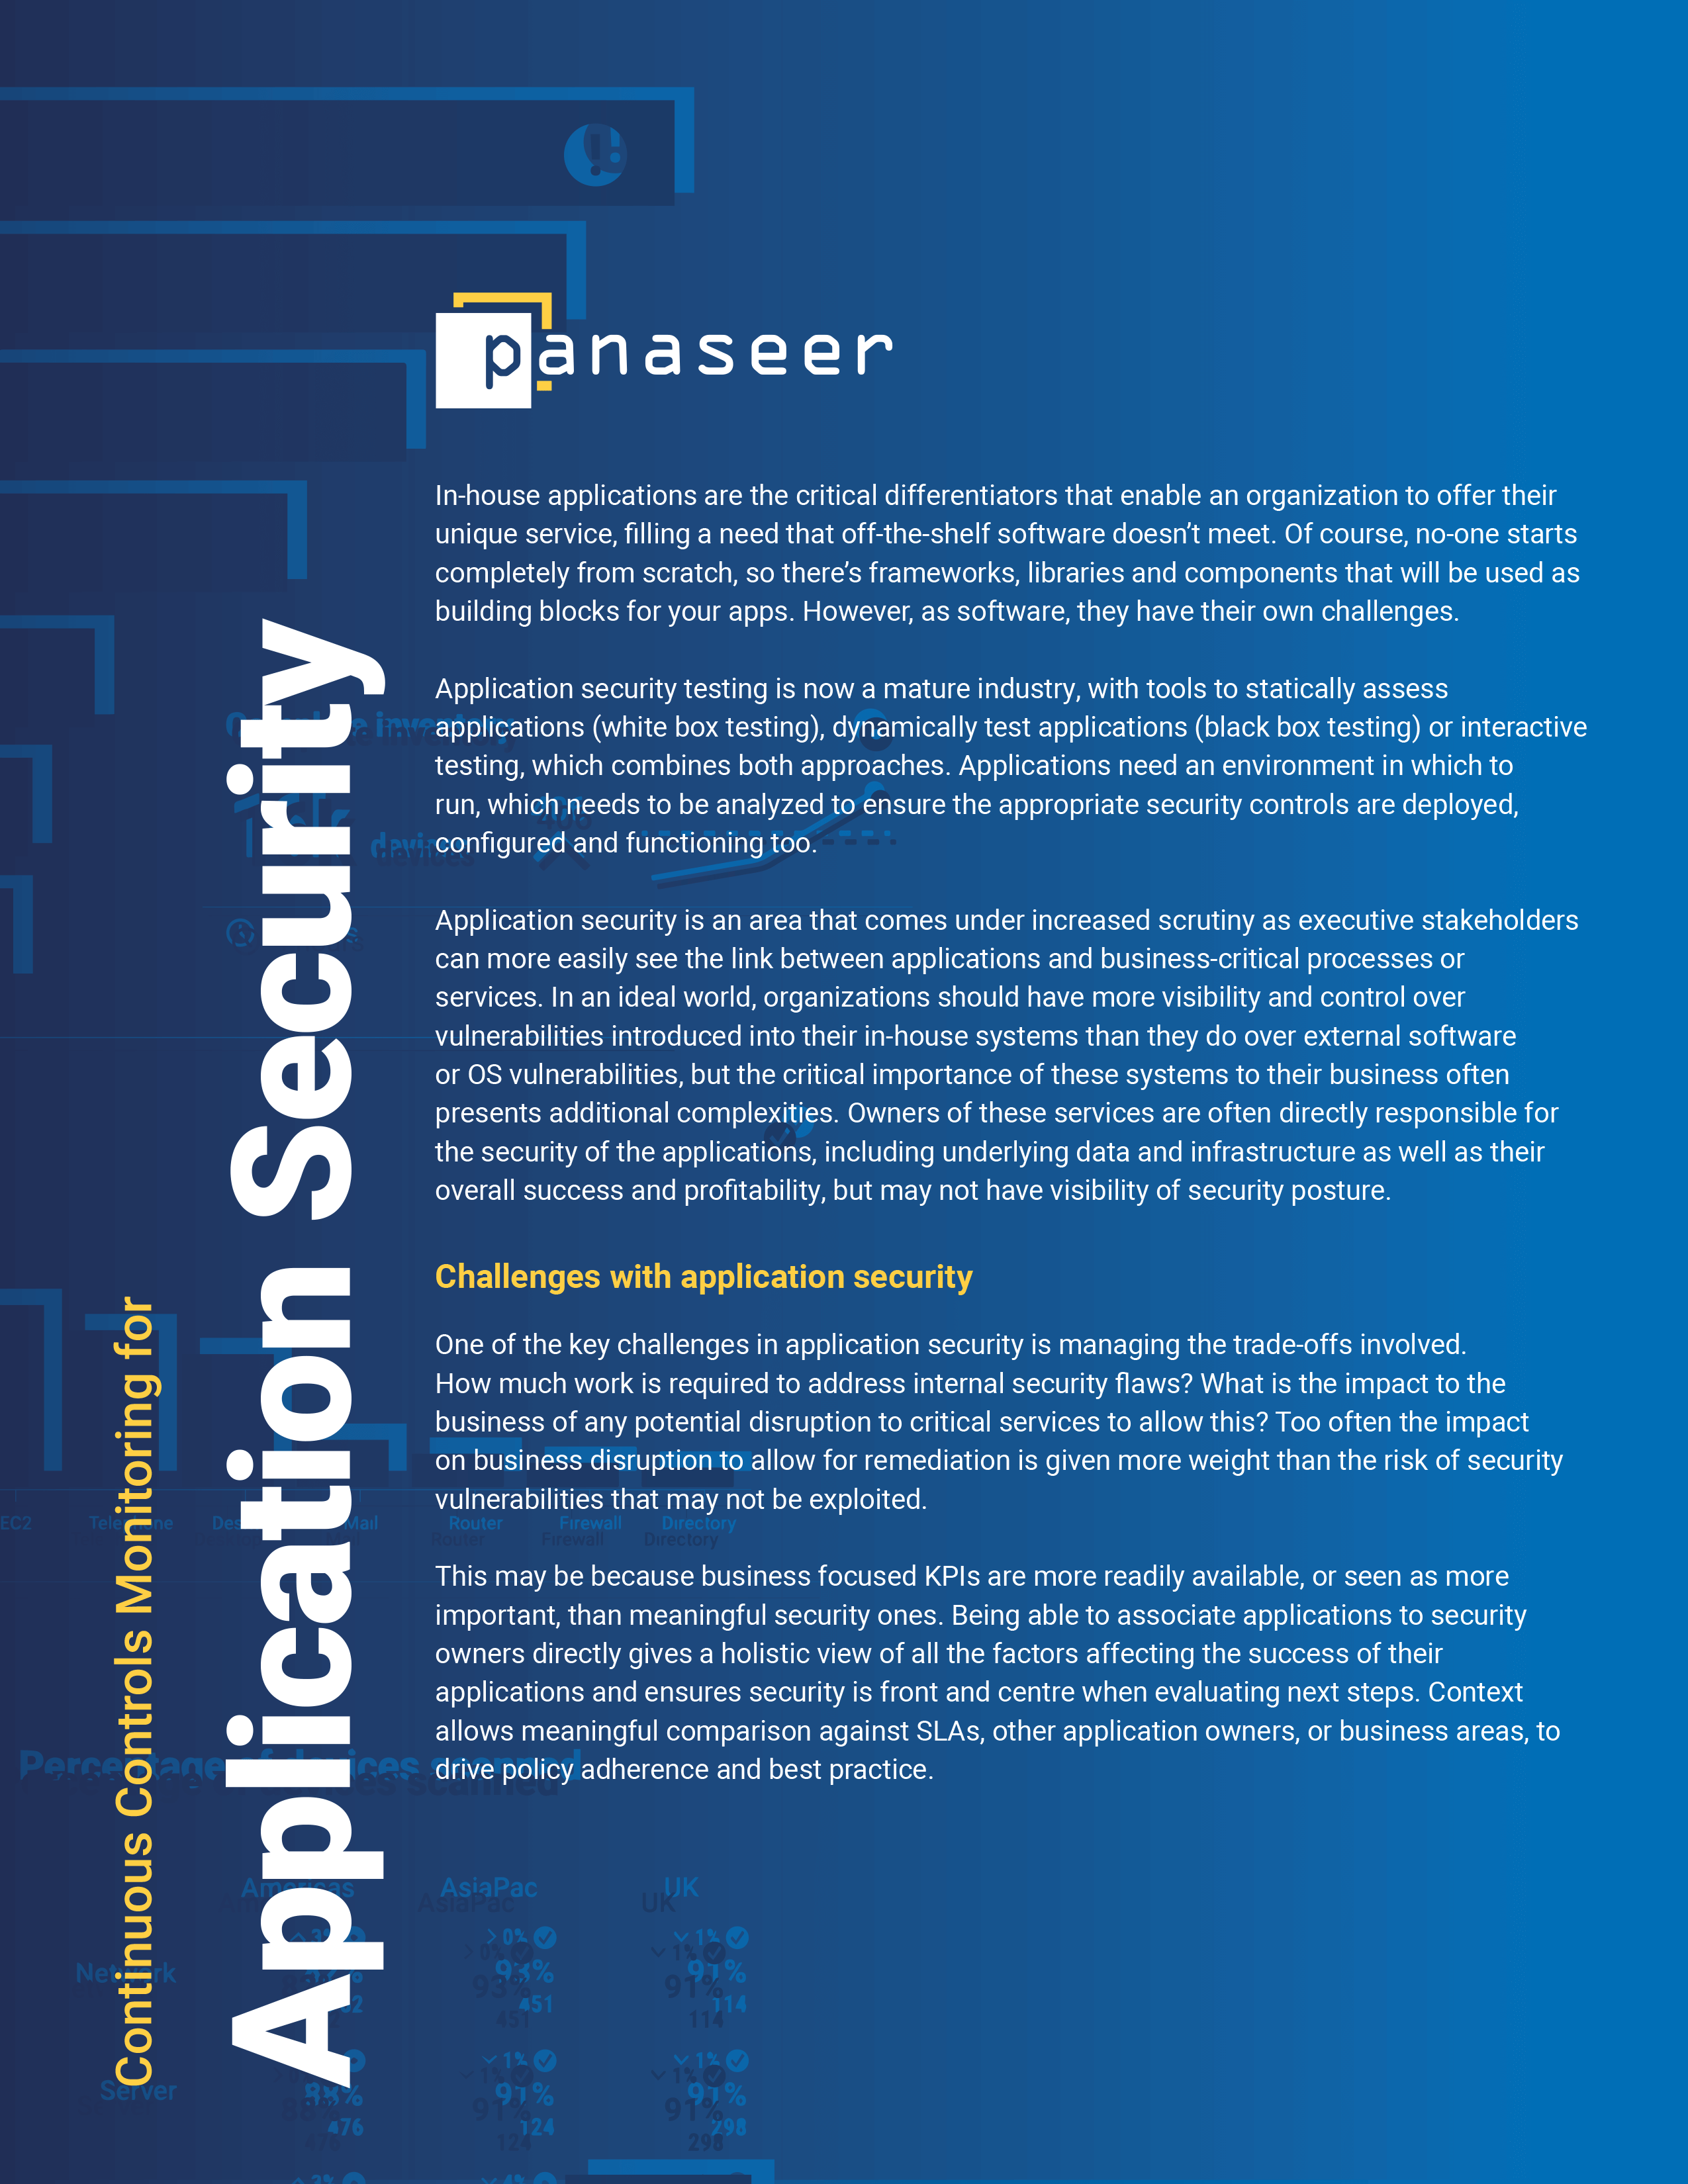 Front cover of Panaseer's Application Security Solutions brief